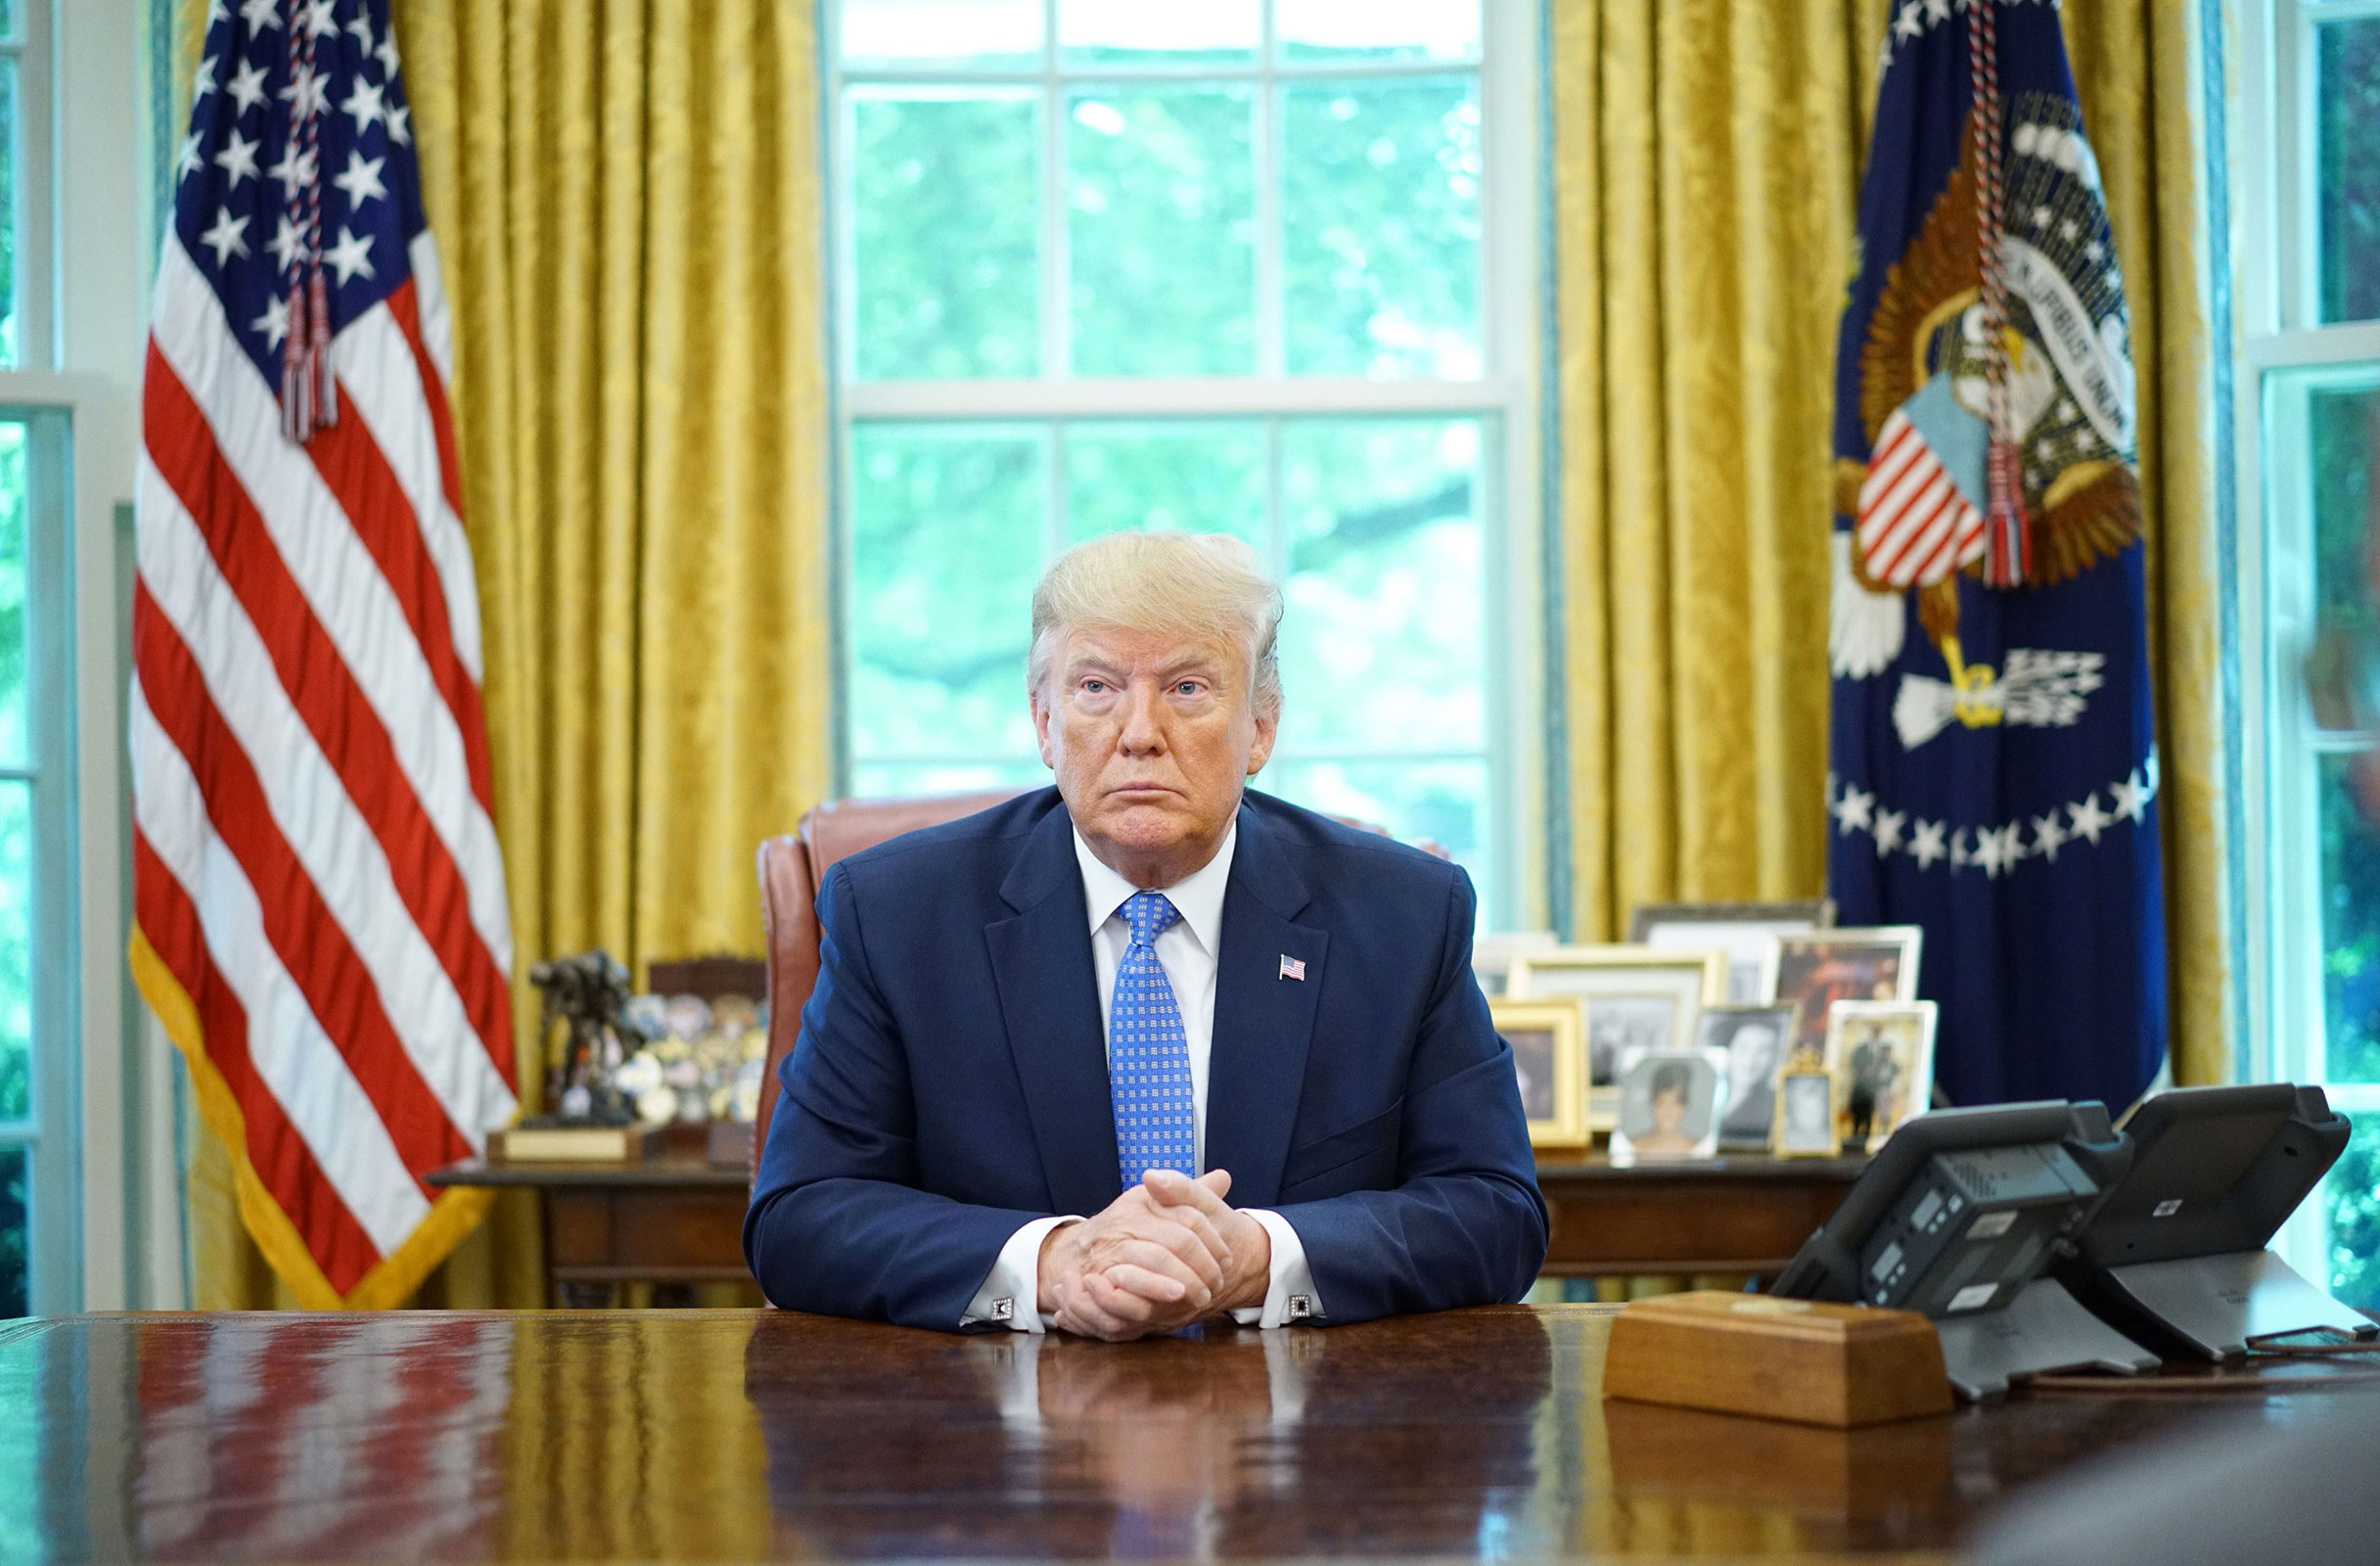 In this 2019 photo, then-President Donald Trump speaks during a meeting with advisors about fentanyl in the Oval Office of the White House in Washington, DC.